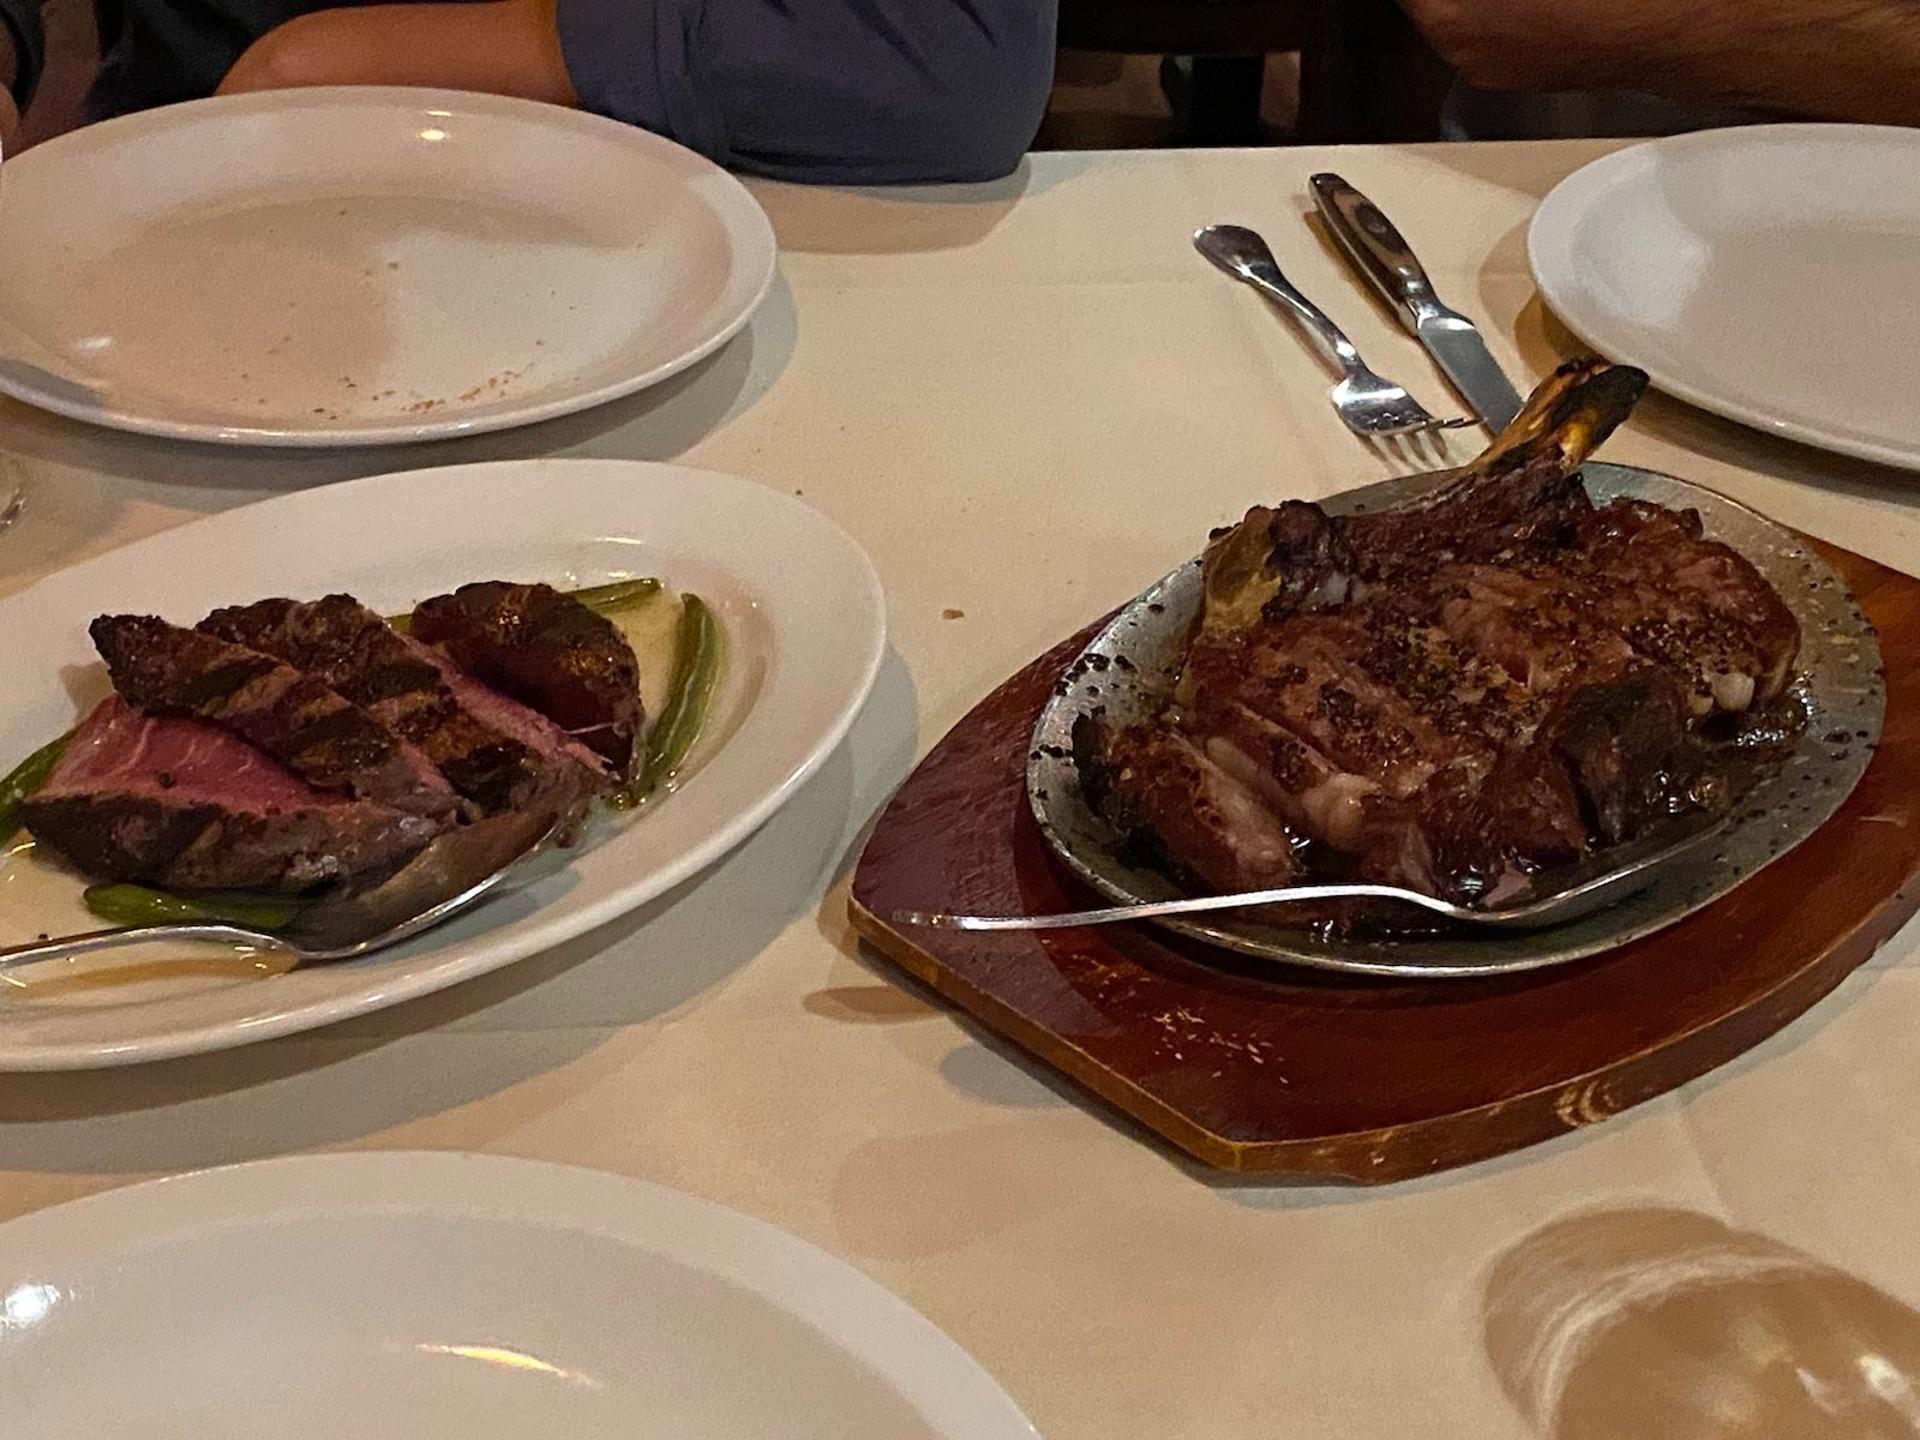 Image of some food from DeStefano's Steakhouse